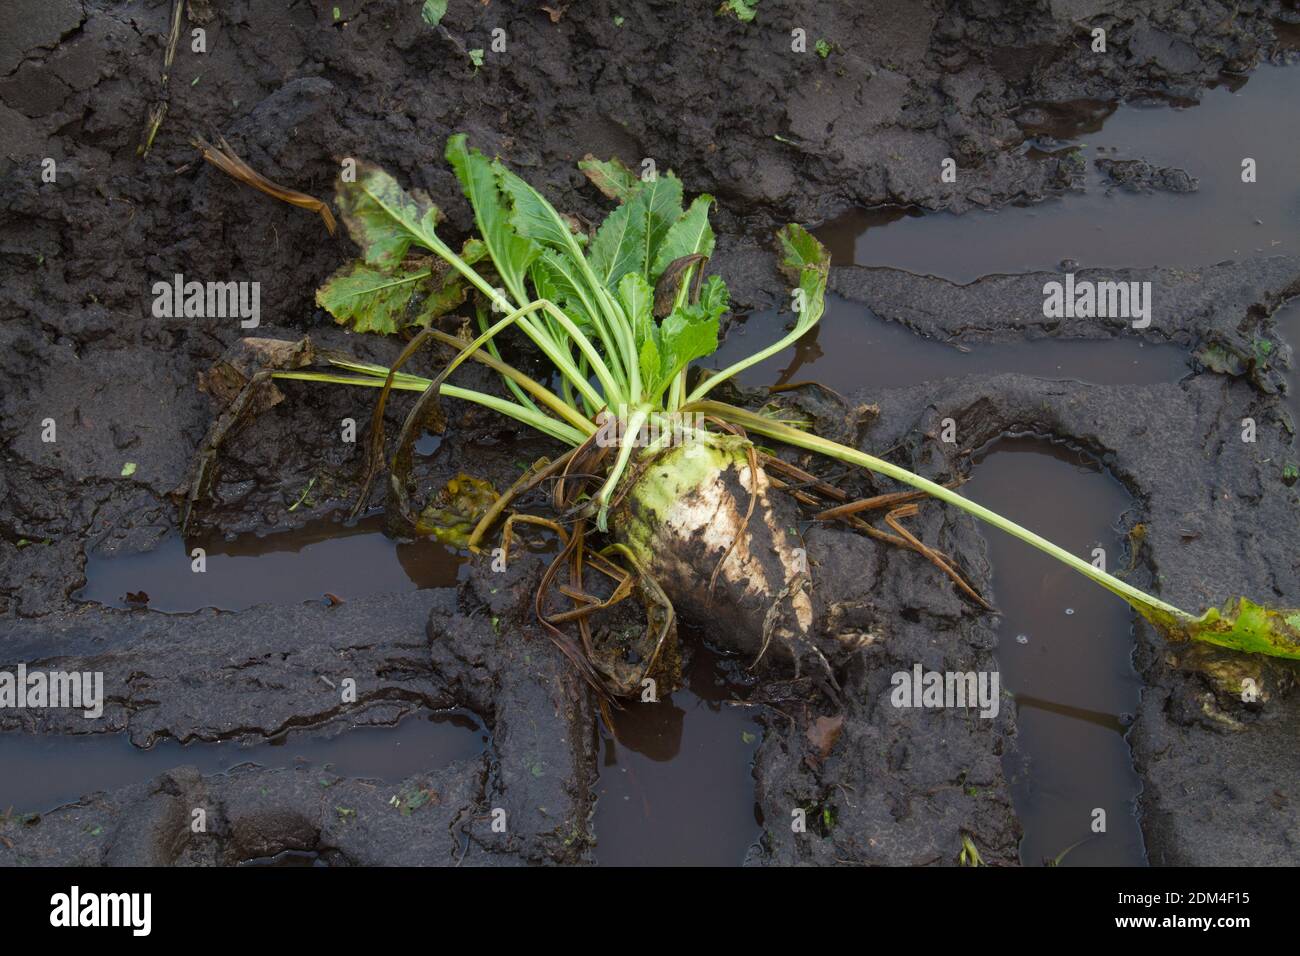 Lost harvest: a sugarbeet left in the mud of a tire track after harvest Stock Photo